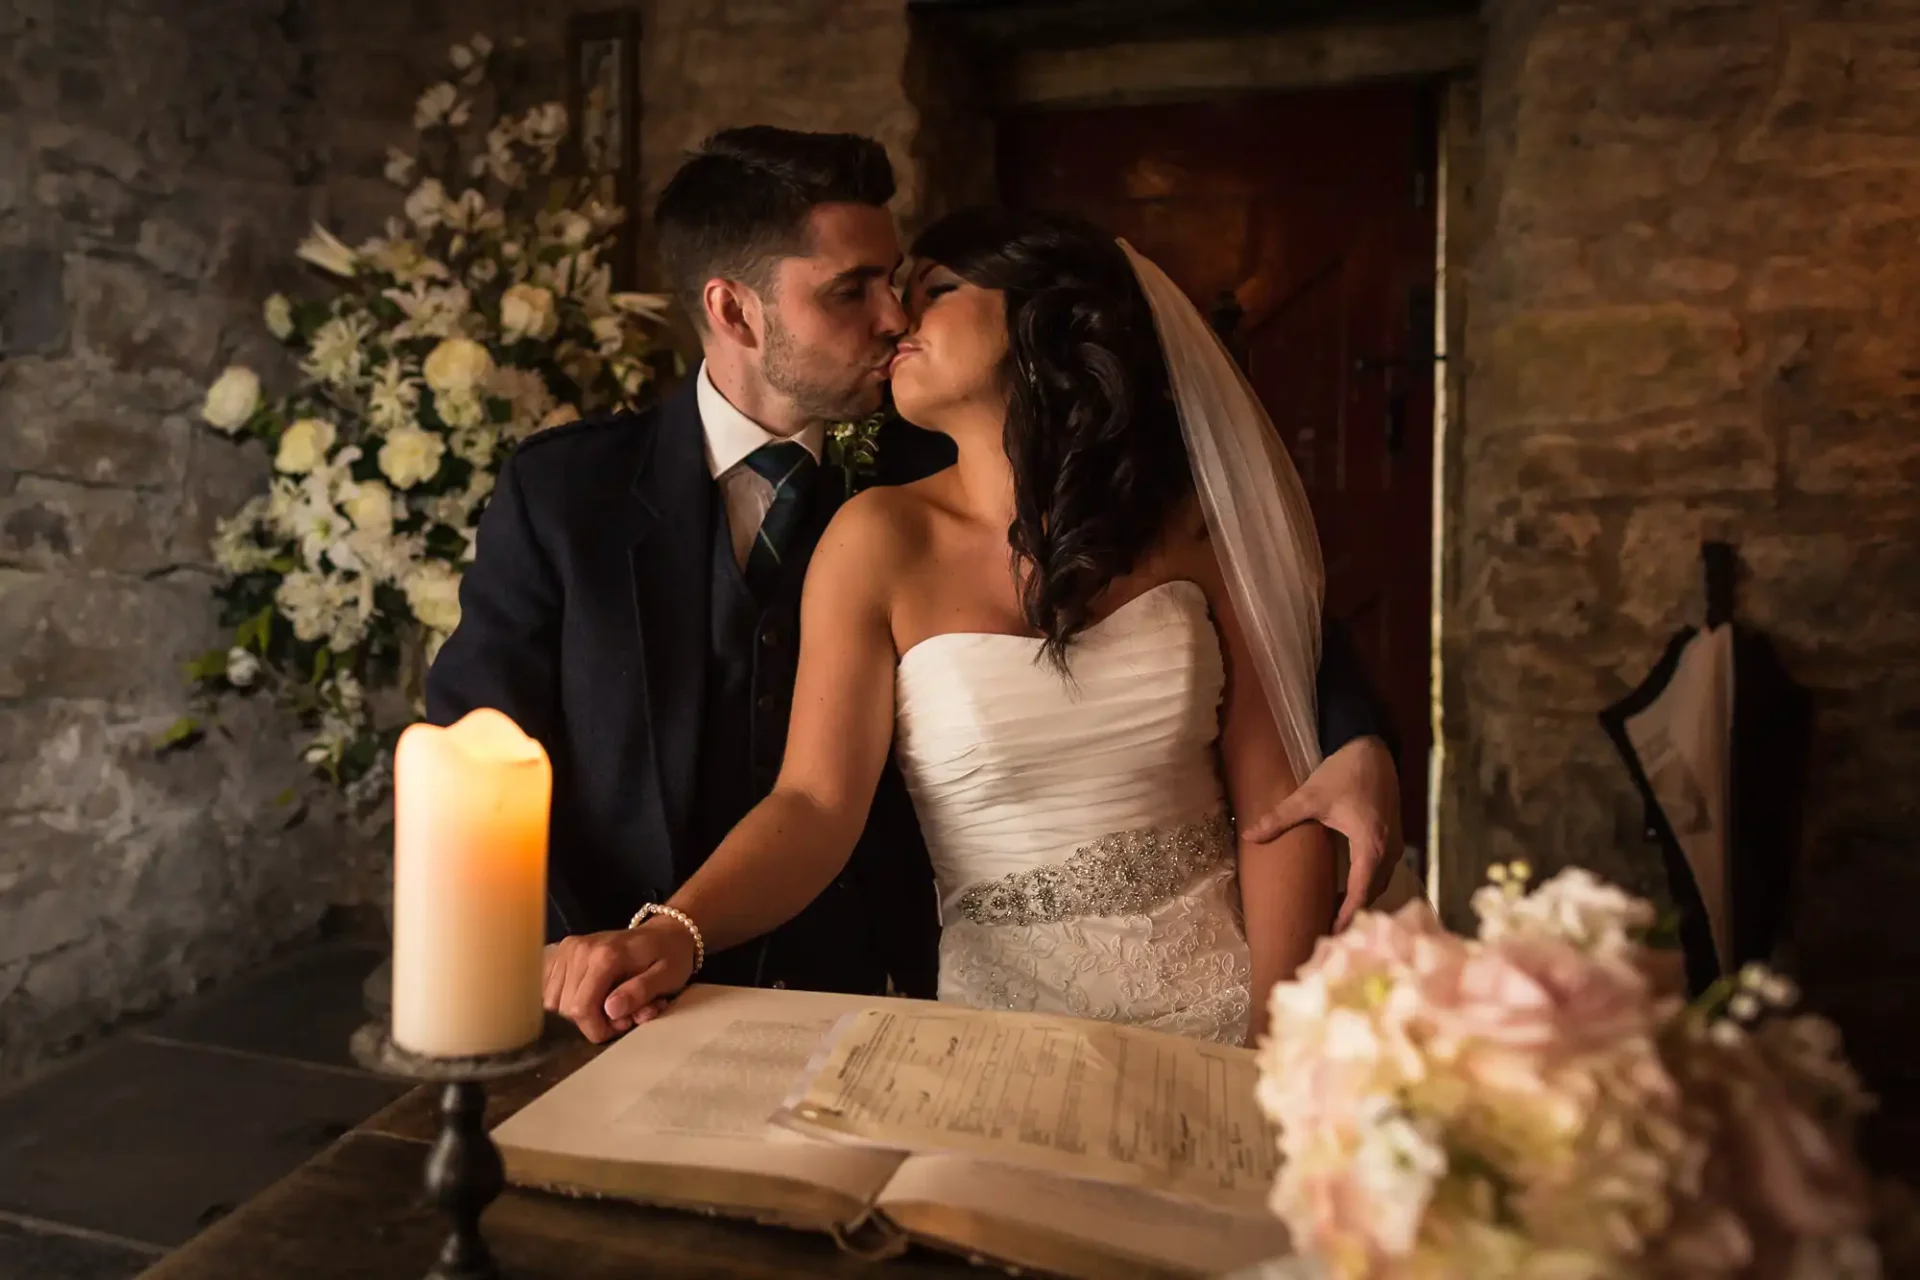 Bride and groom kissing at the signing table, surrounded by candles and flowers in a dimly lit rustic venue.